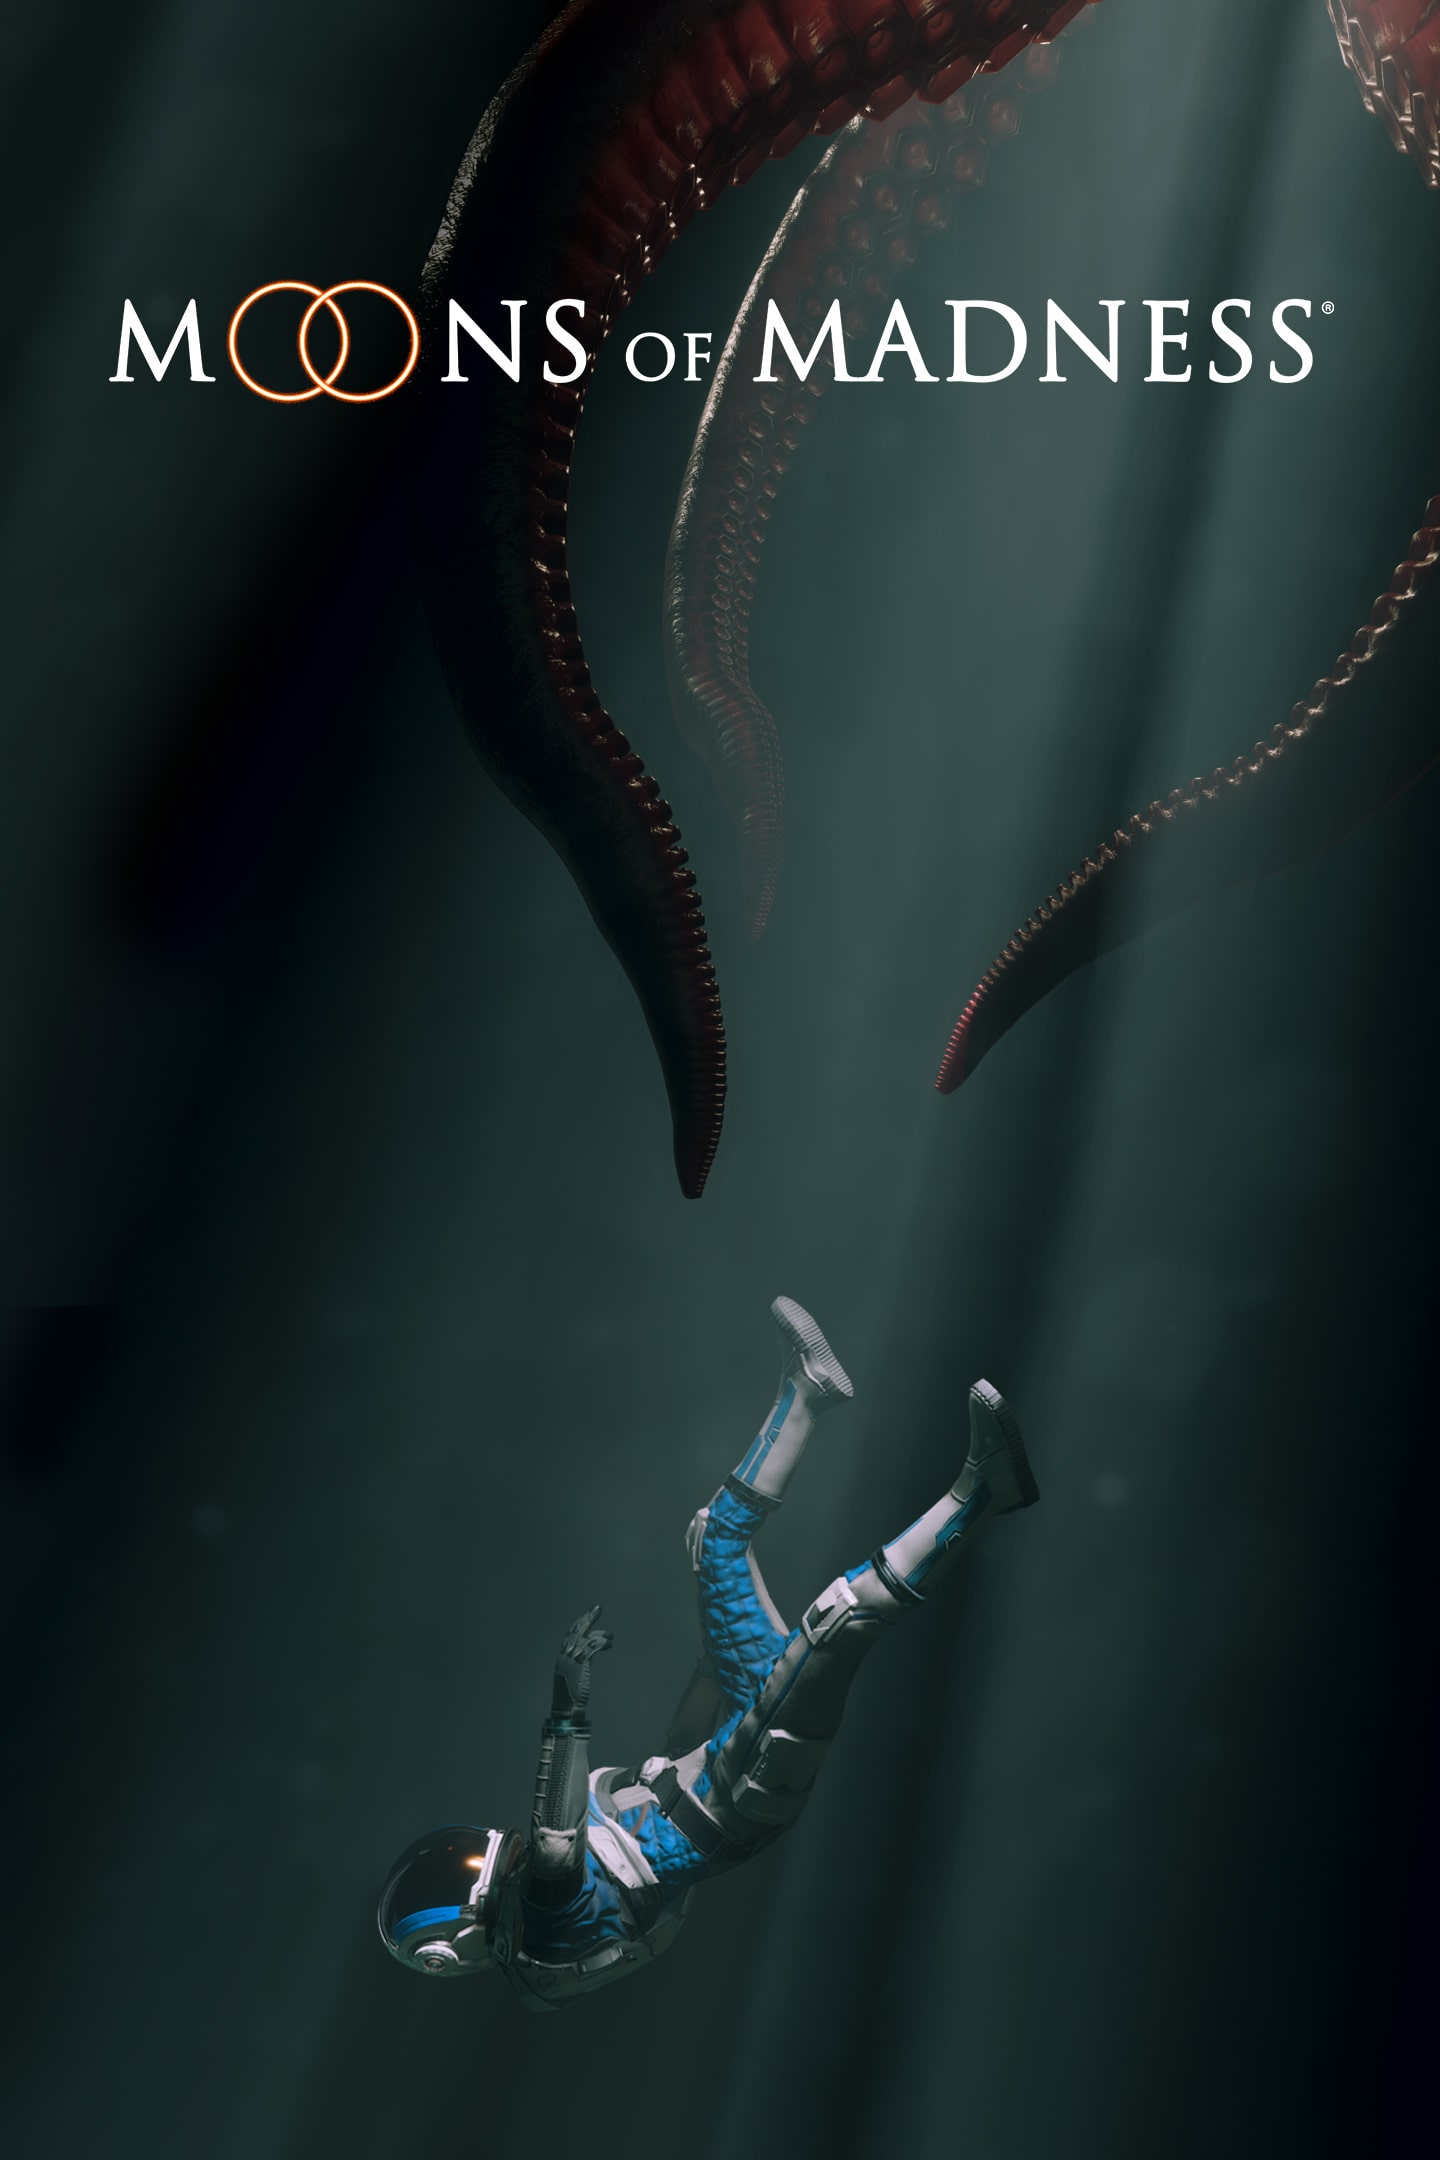 Moons of madness steam фото 36